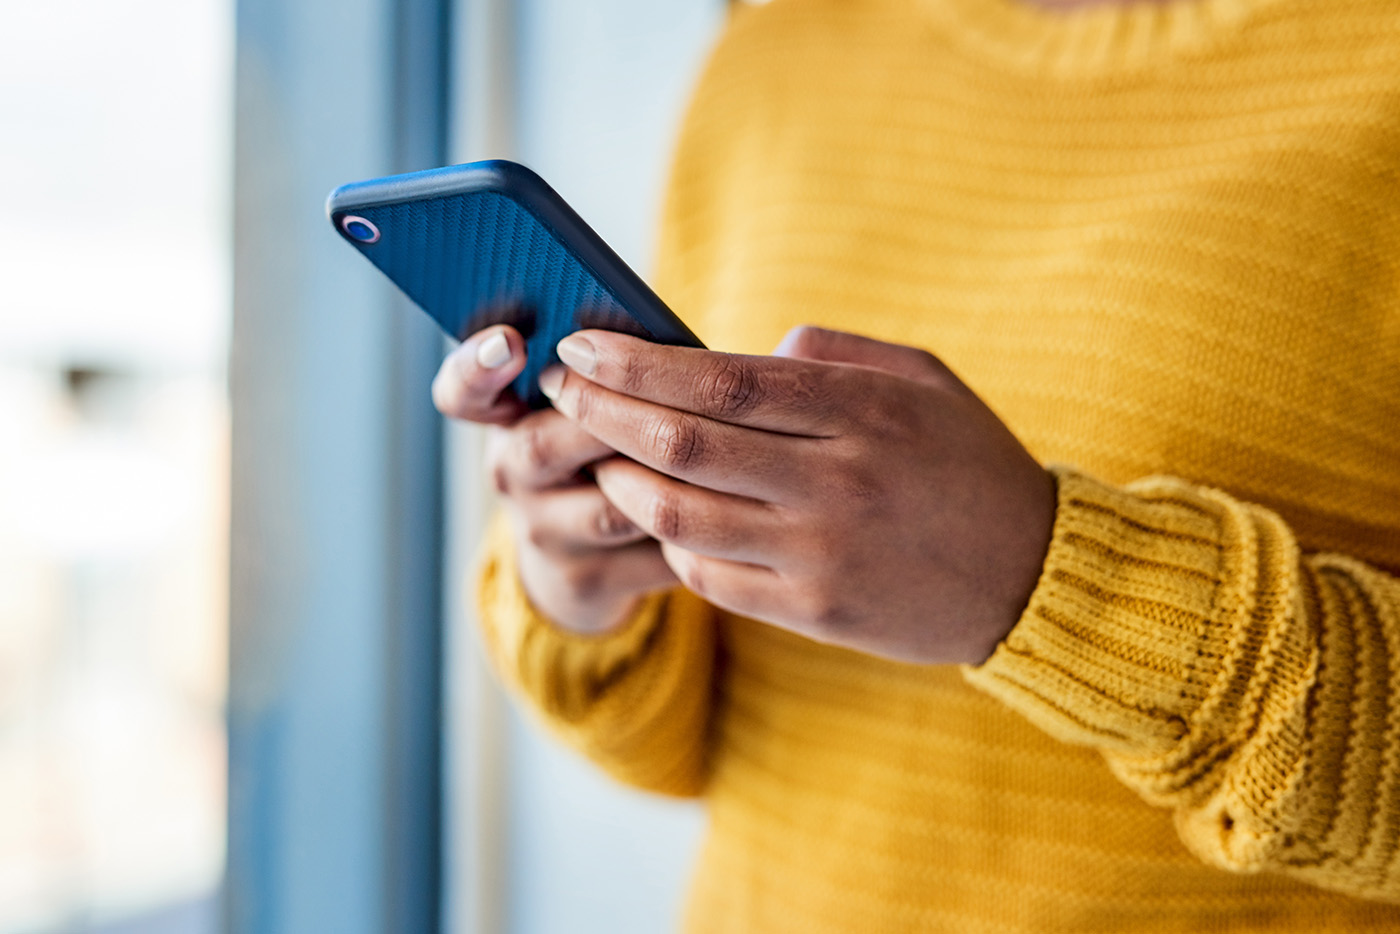 A person in a yellow sweater texting